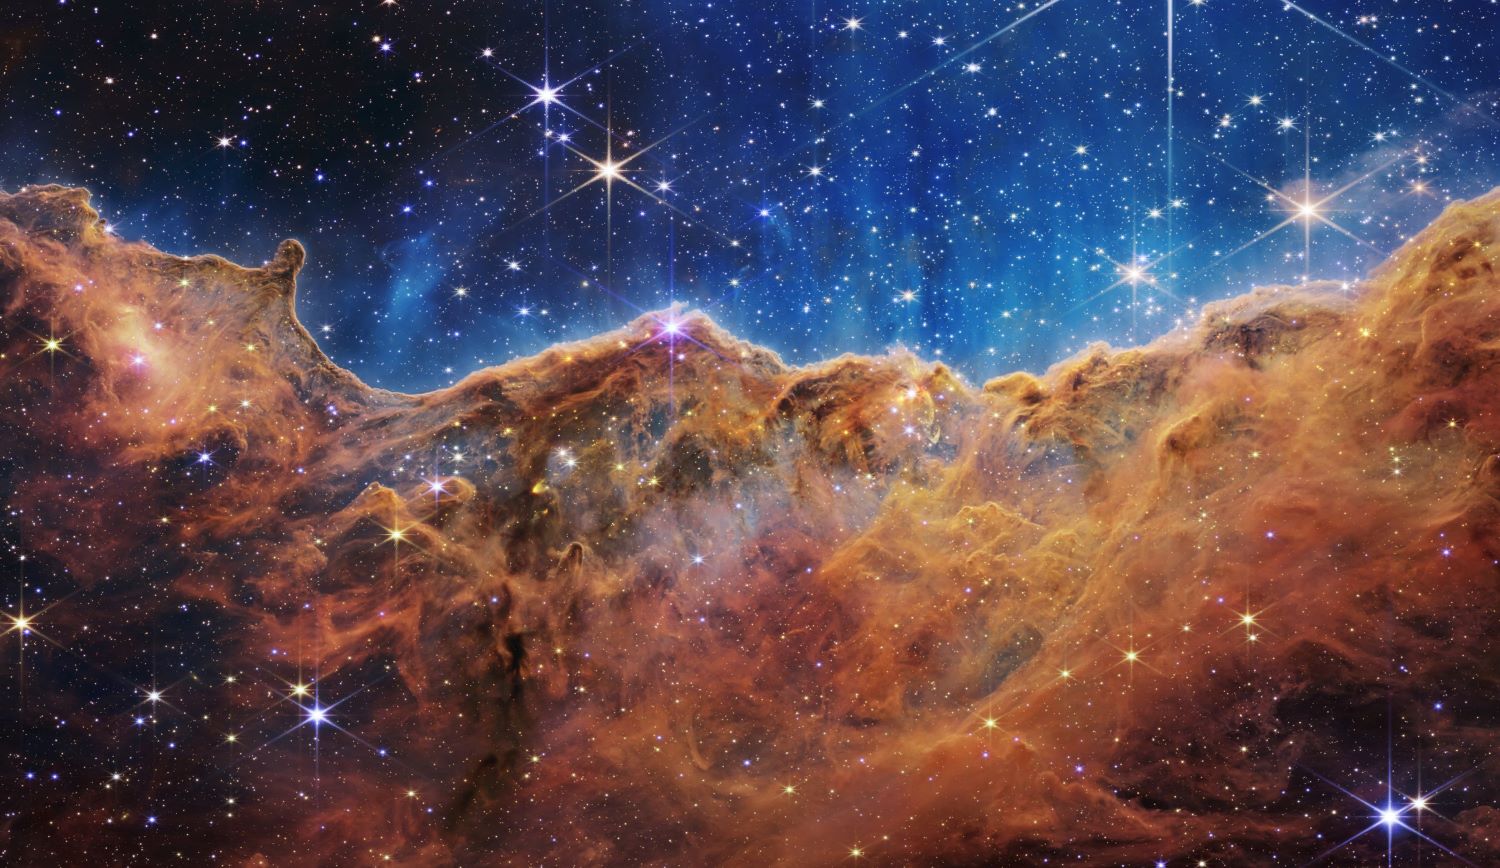 Cliff-like structures are carved into the gas clouds of this nebula.